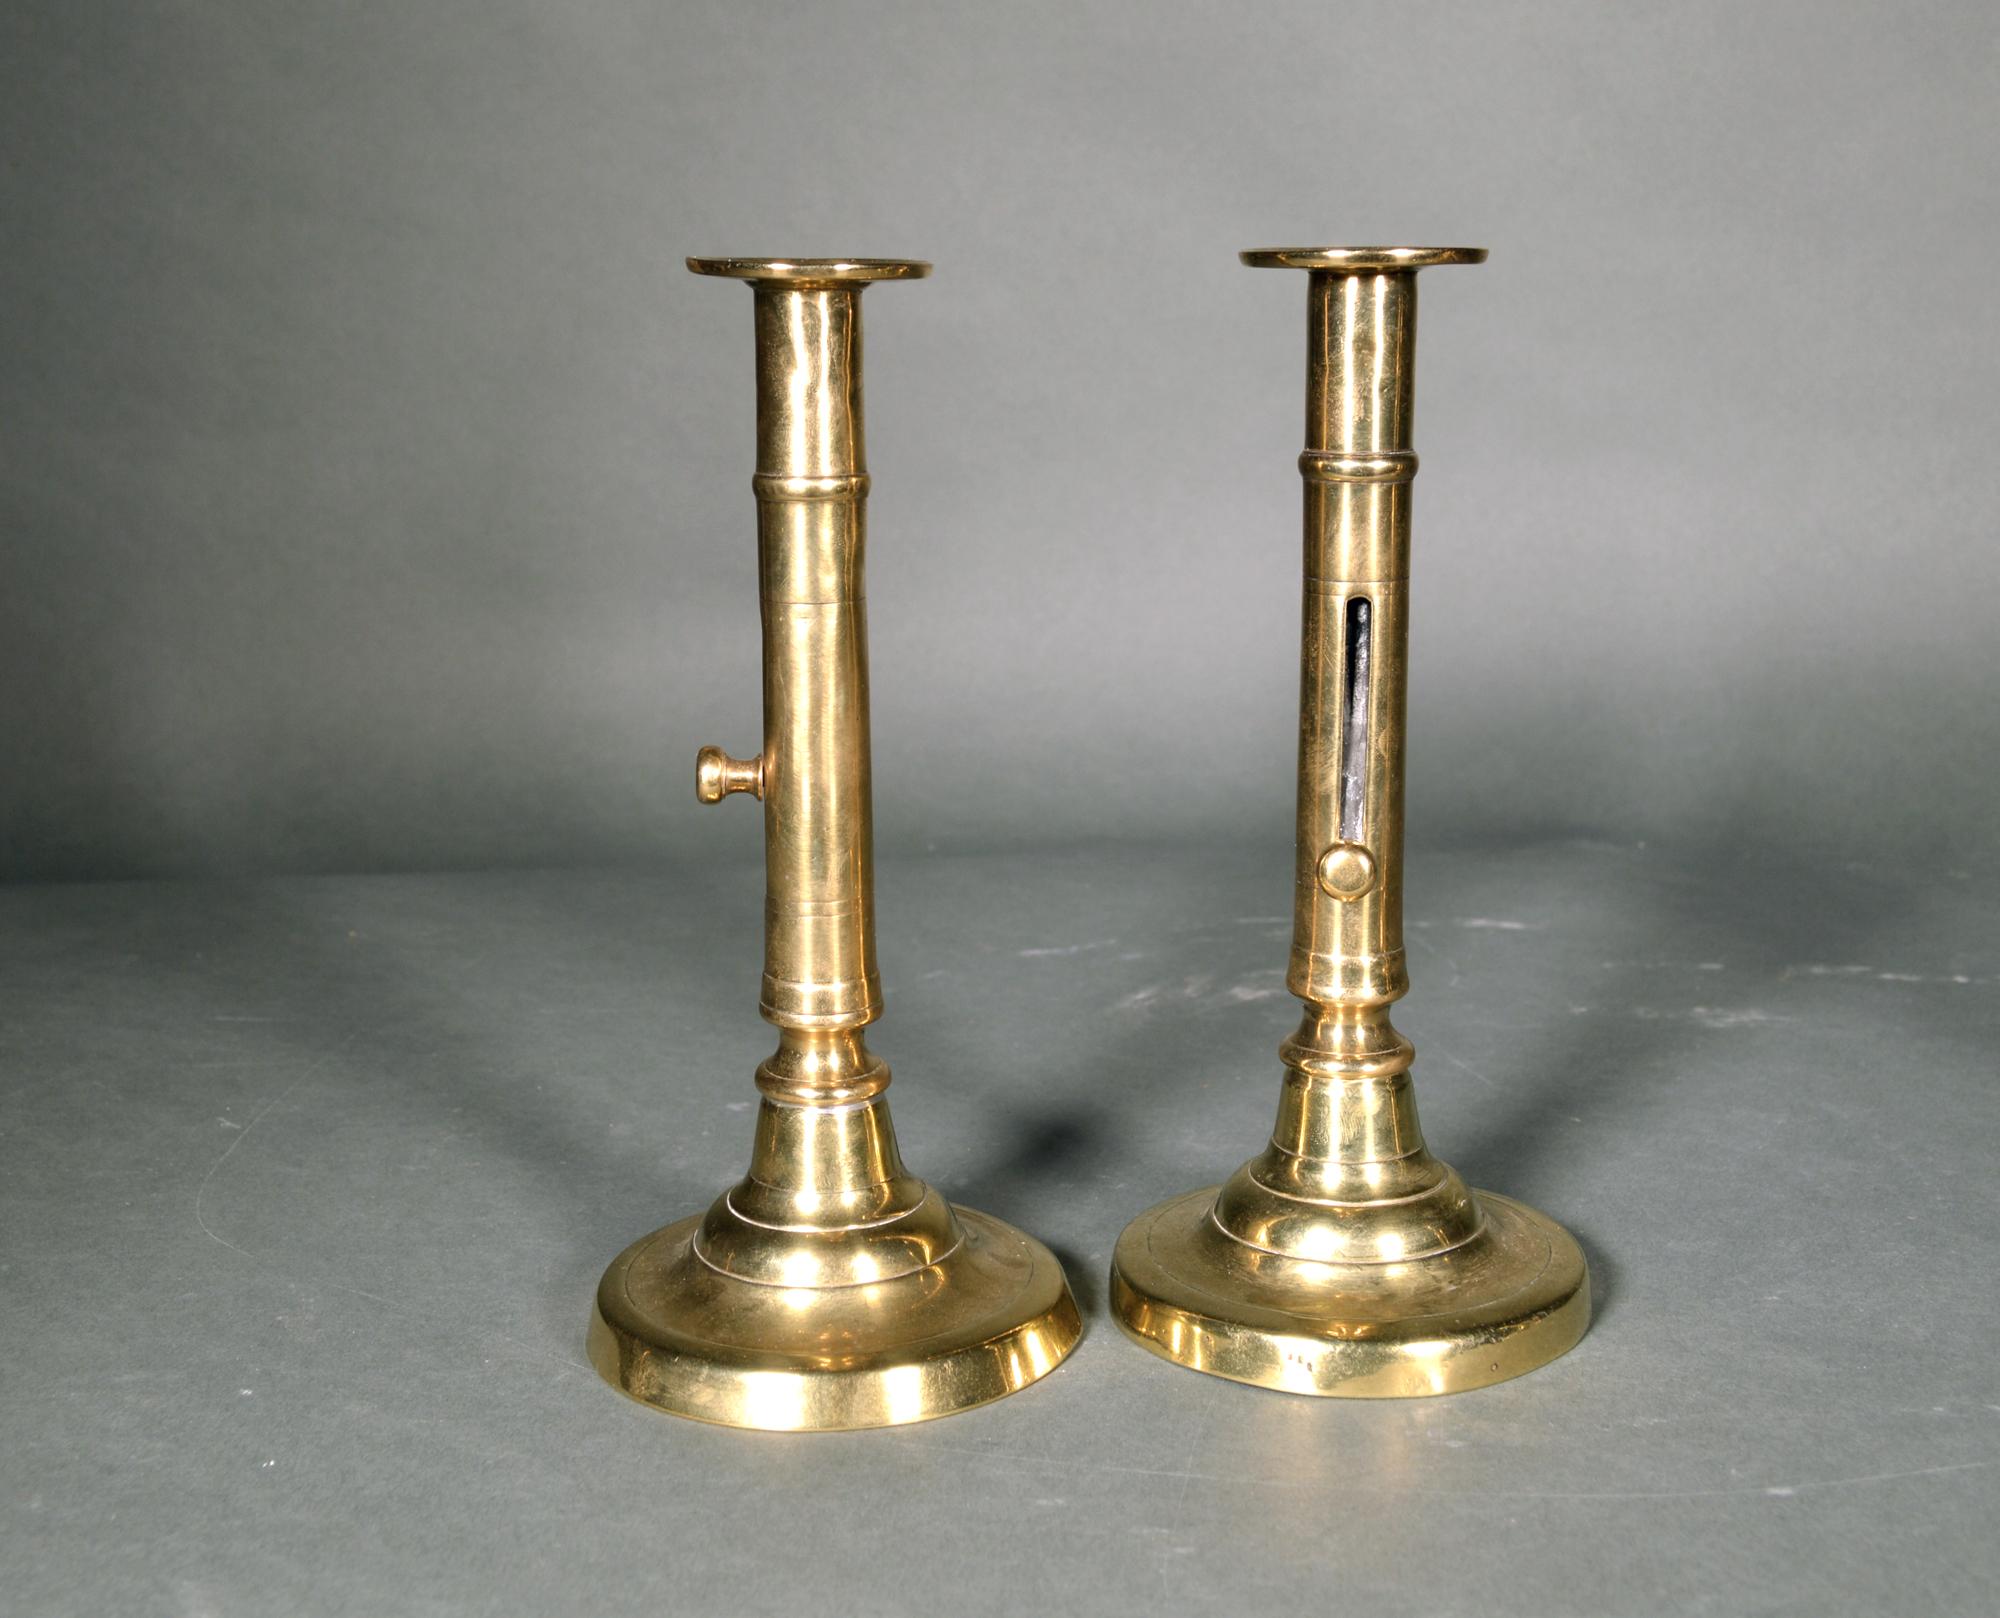 Antique Georgian English brass side-eject candlesticks- pair,
circa 1770-1800.

The pair of brass push-up brass candlesticks have a circular domed base with a central column with a button end mechanism to eject a candle.

Dimensions: 8 1/2